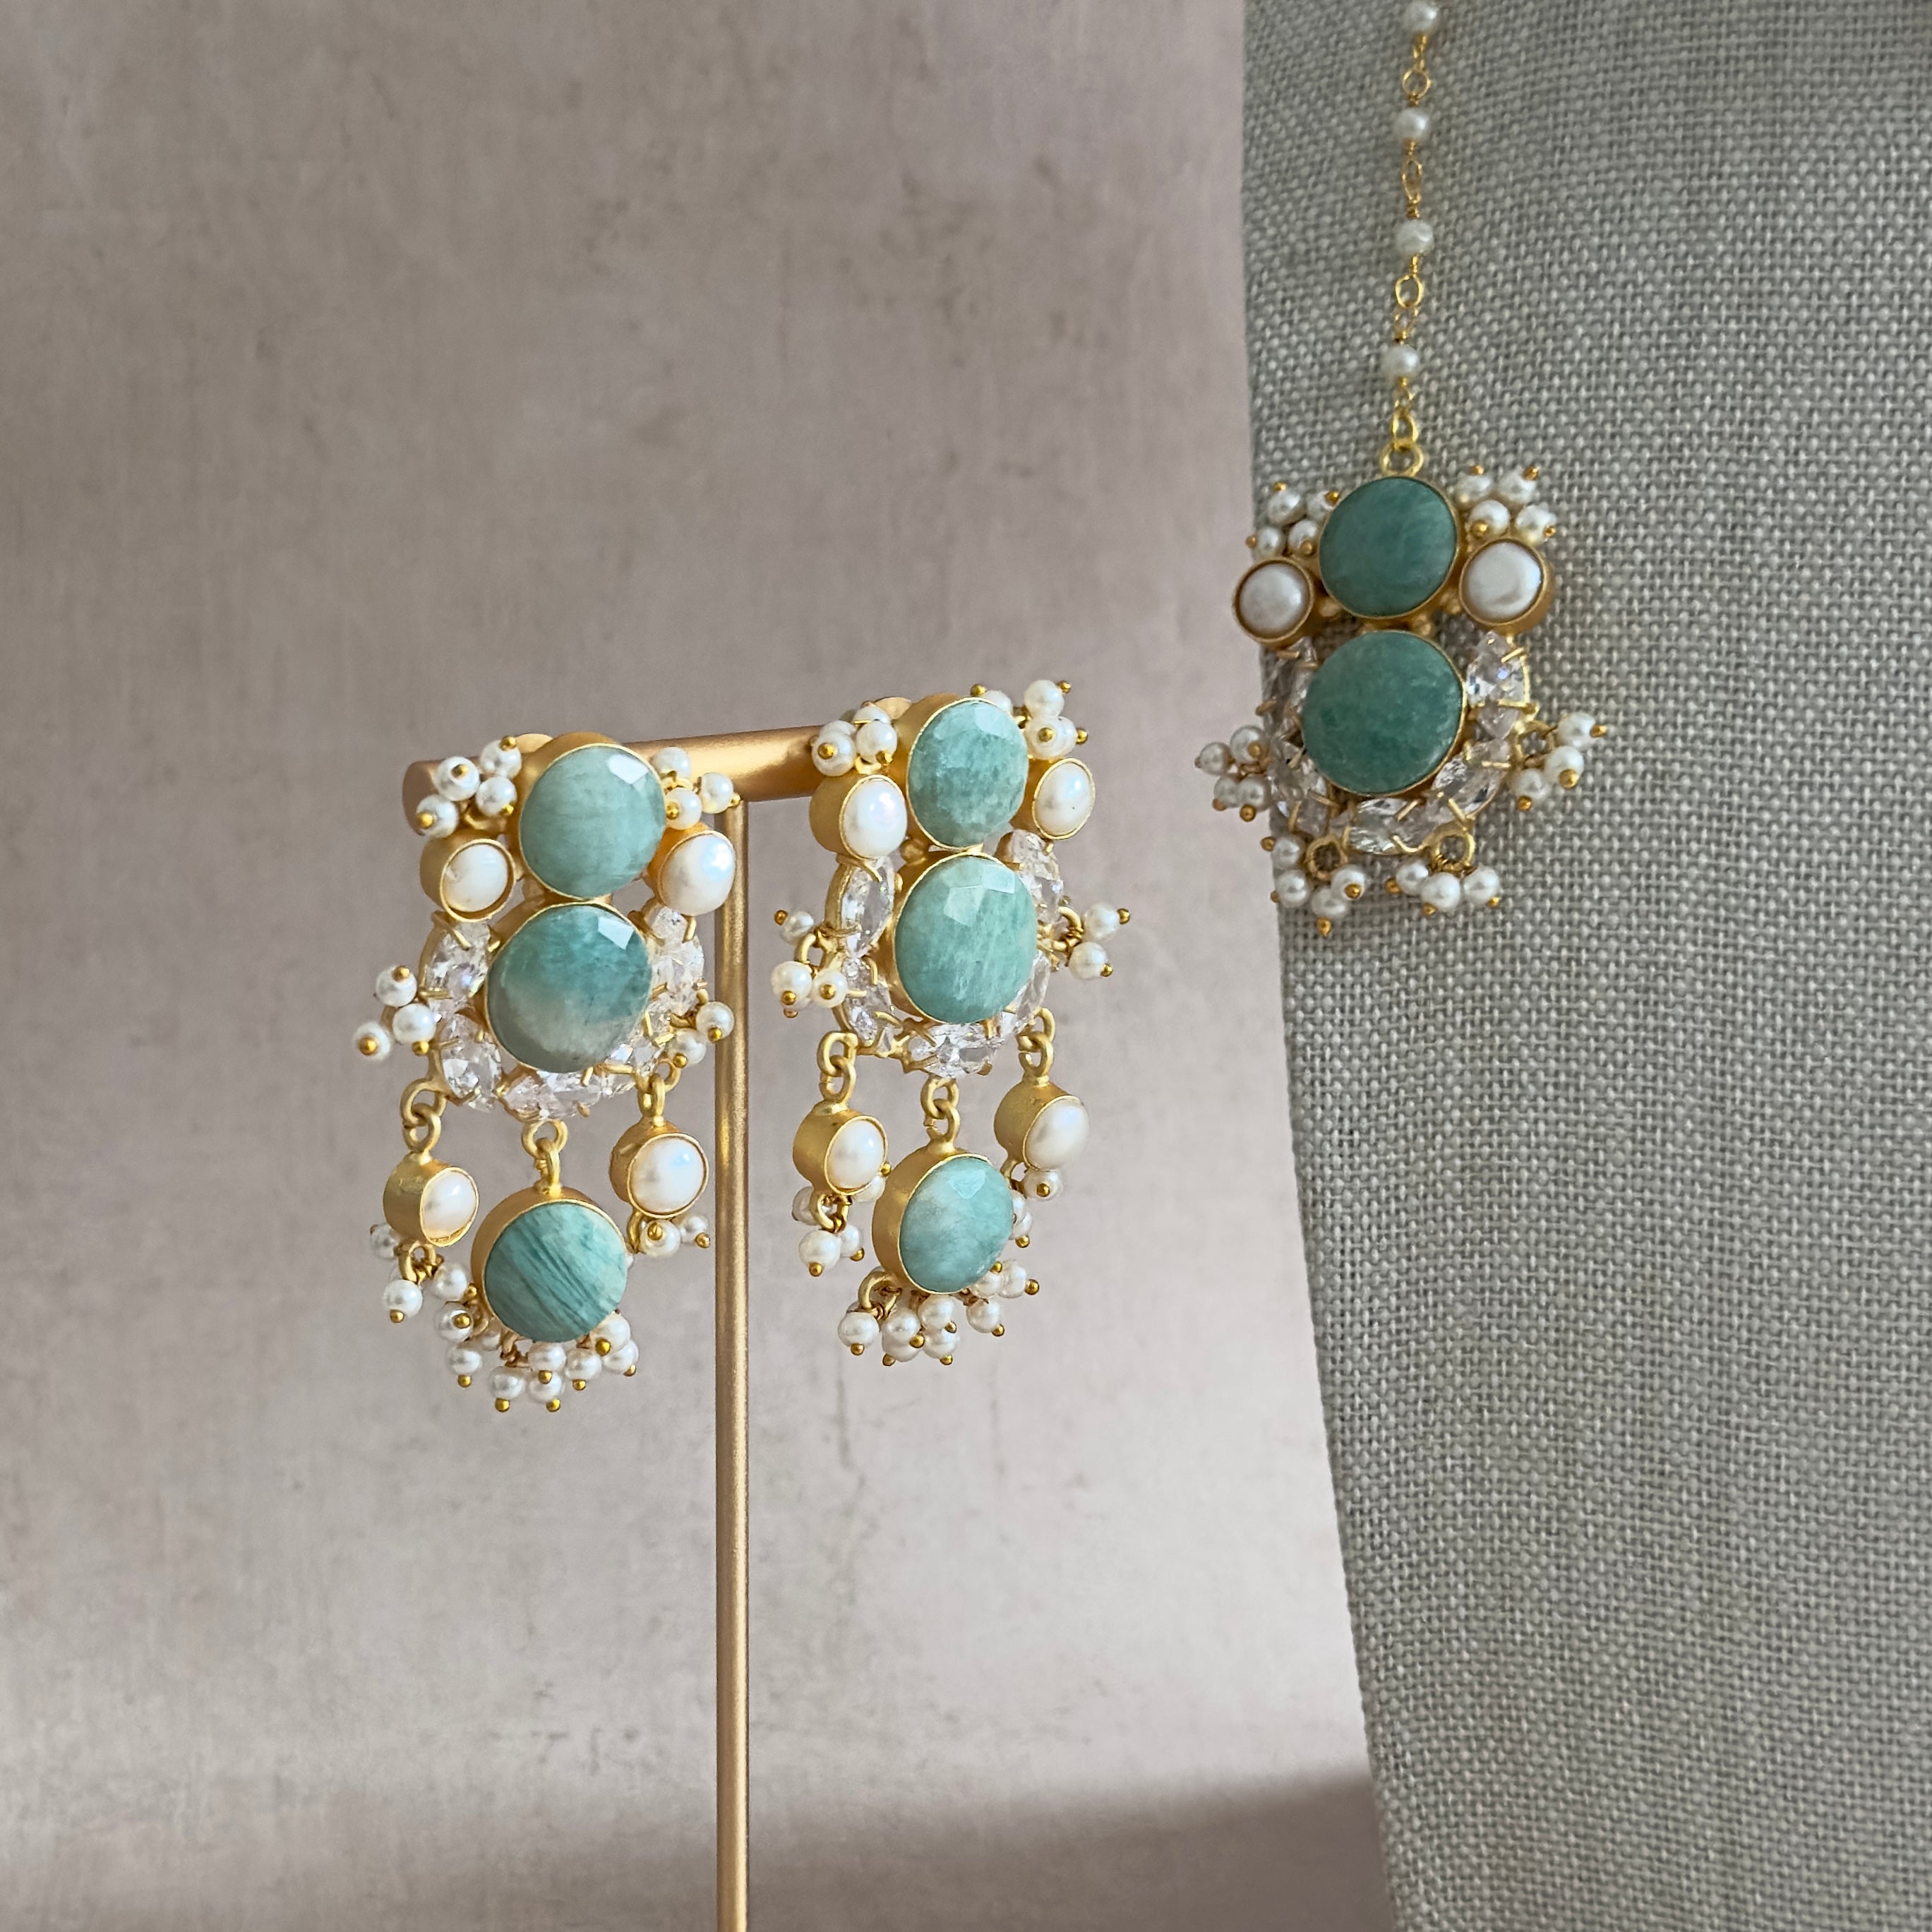 Make a statement with our Havana Jade Choker Set featuring natural amazonite stone, sparkling cubic zirconia, and unique freshwater pearls. Complete with matching earrings and tikka, this set exudes elegance and adds a touch of nature to your look. Elevate any outfit with this one-of-a-kind set!